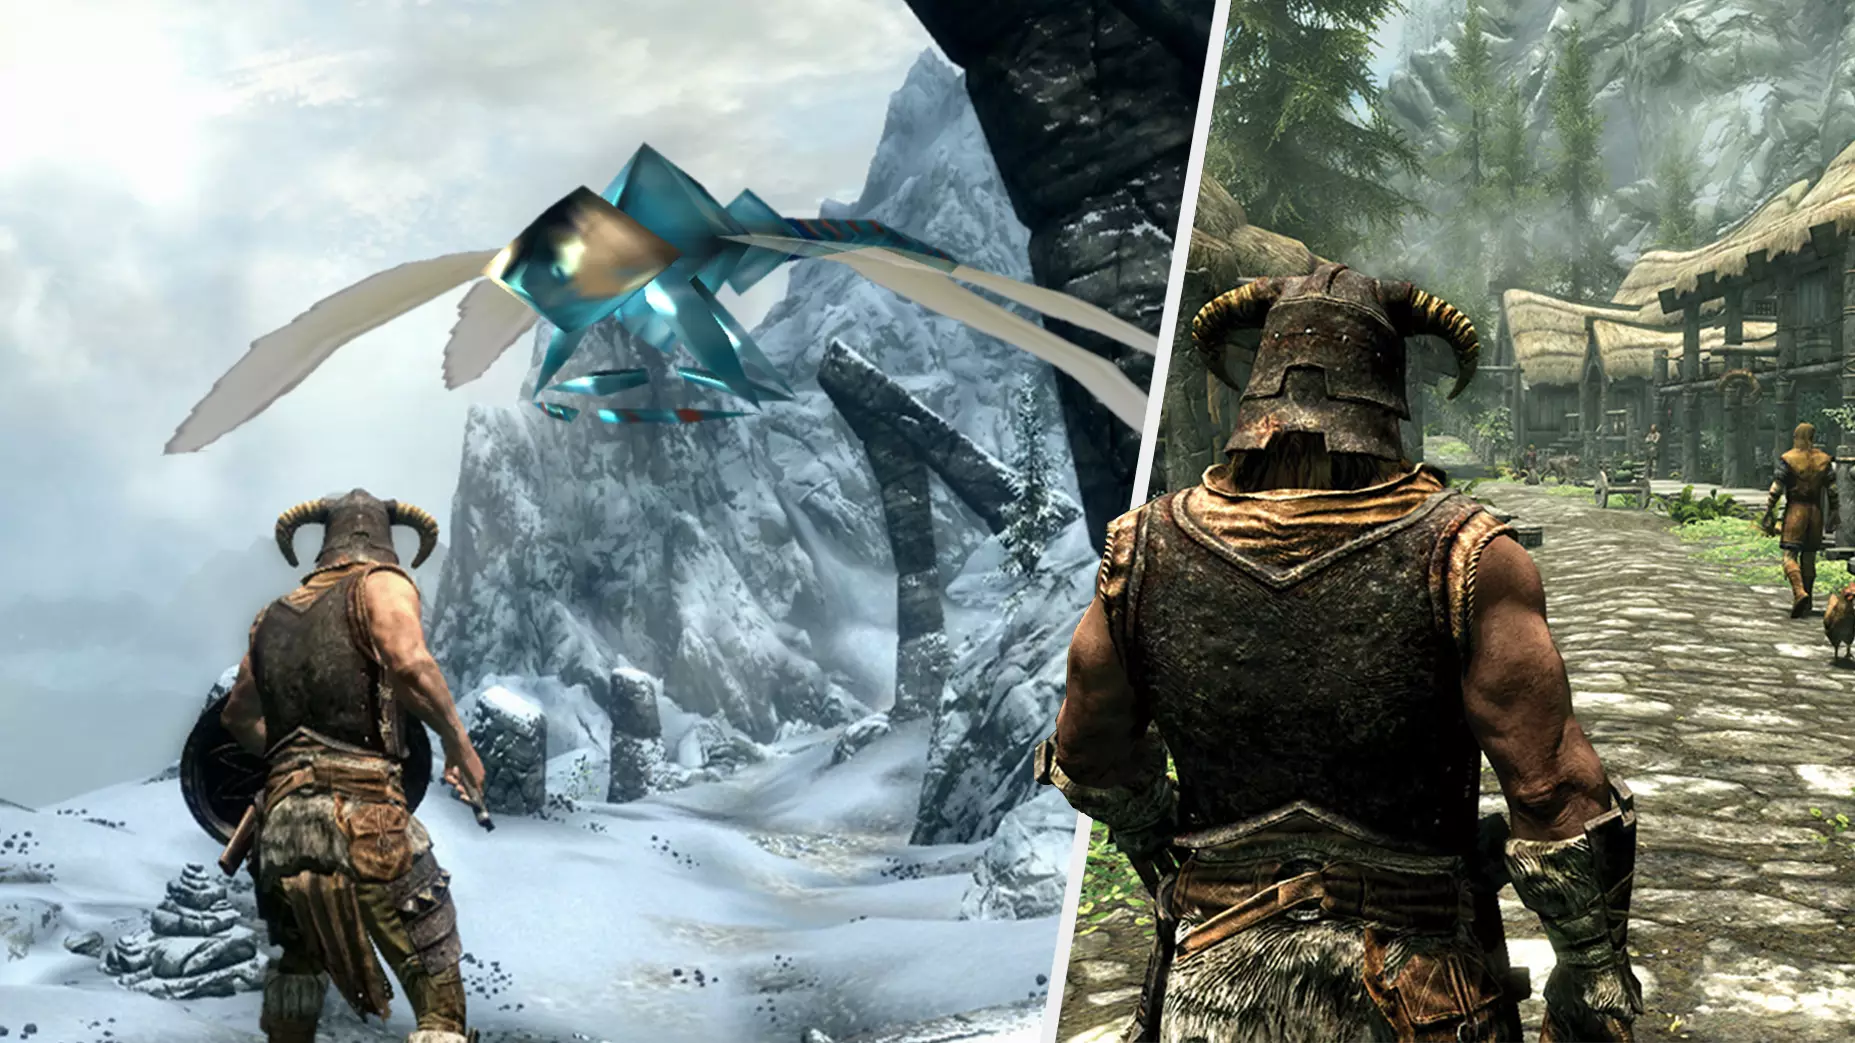 'Skyrim' NPC Gets Kidnapped By Dragonfly In One Of The Greatest Glitches We've Seen